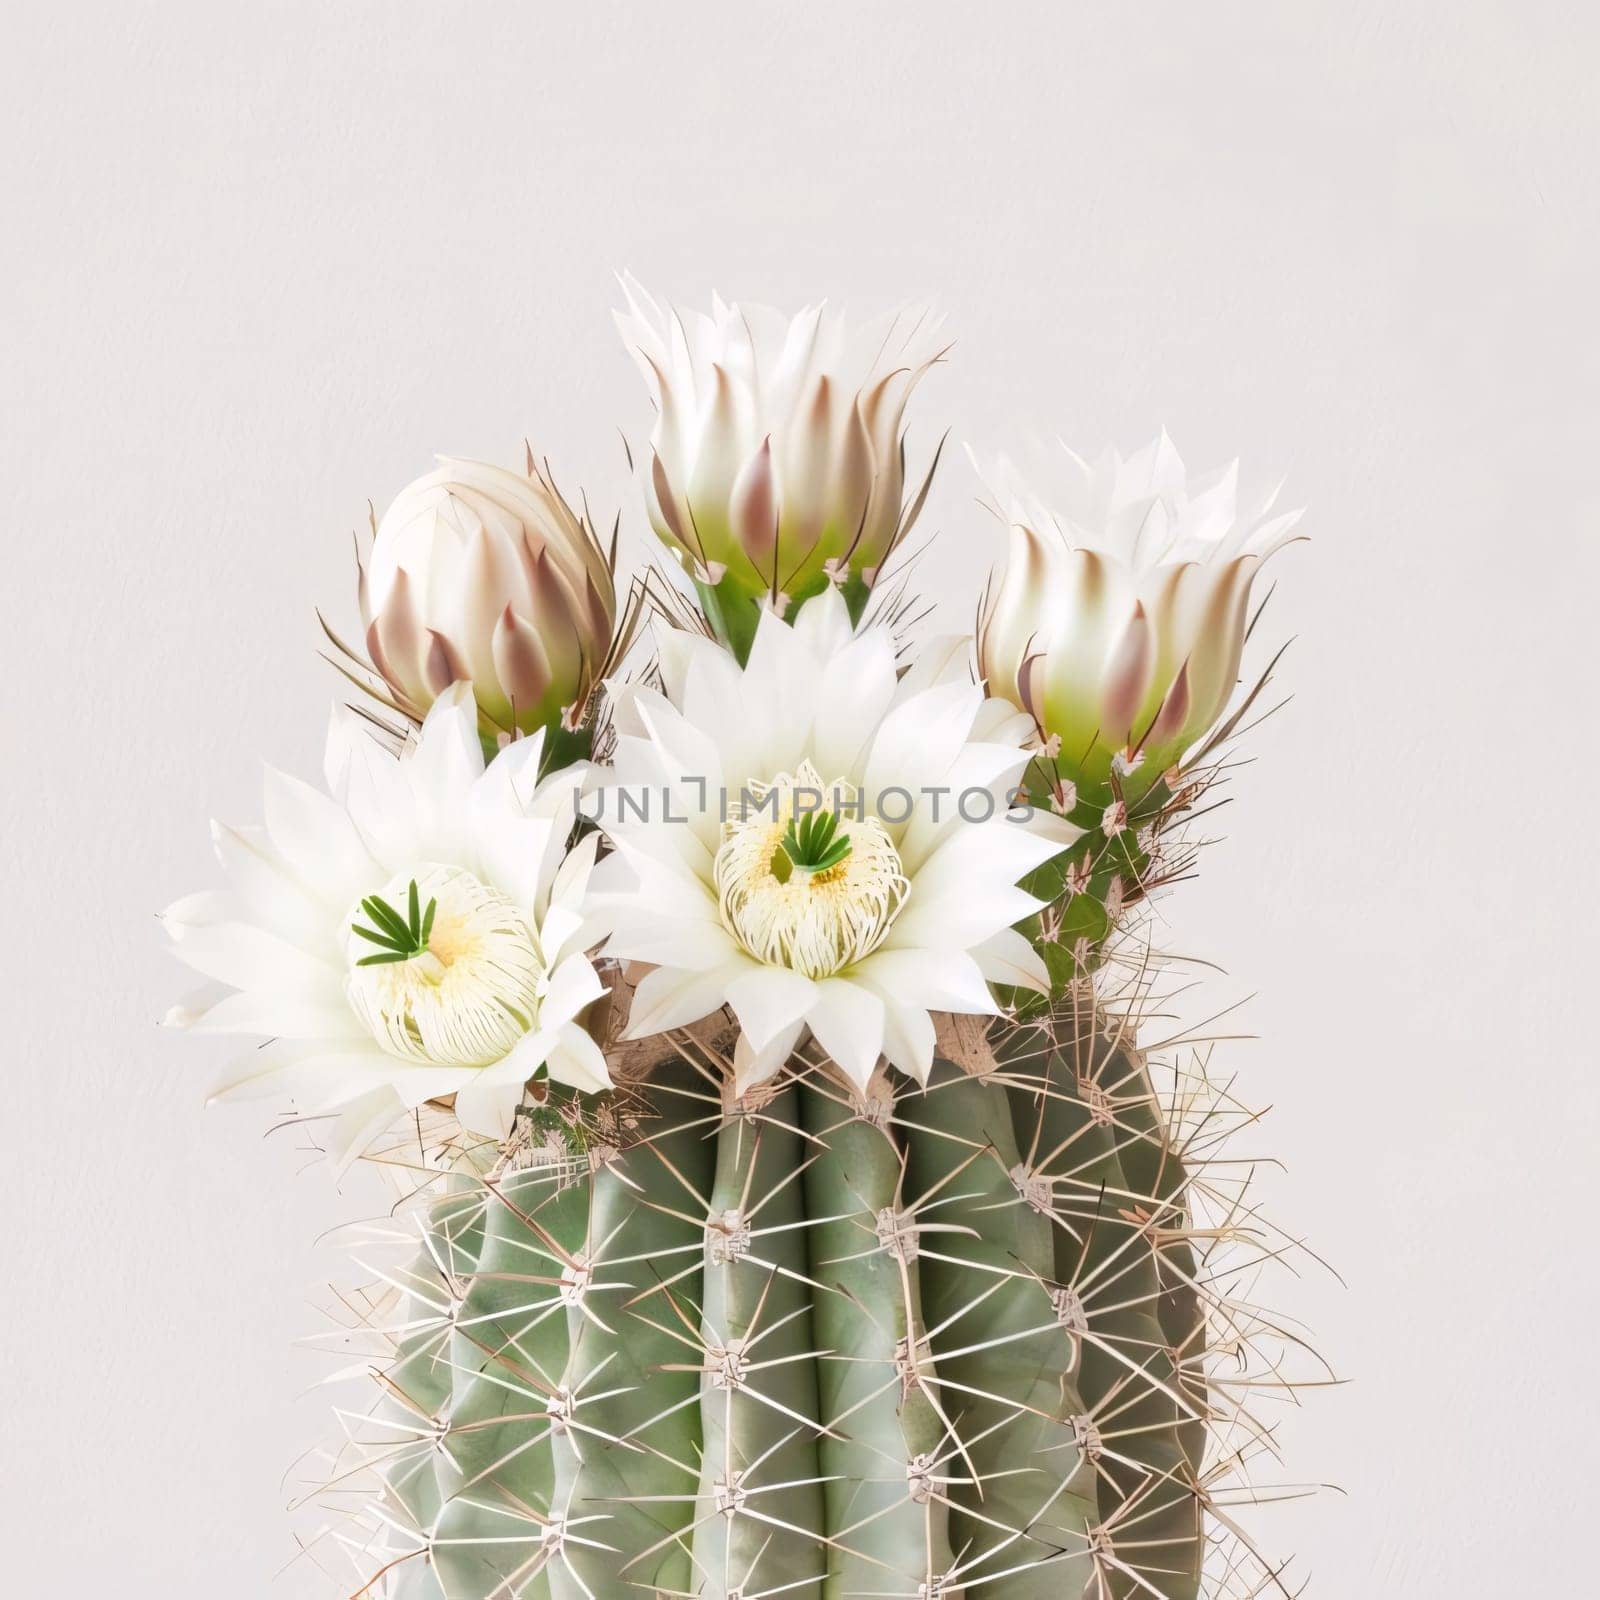 Plant called Cactus: Beautiful cactus flowers on white wall background. Flat lay, top view.